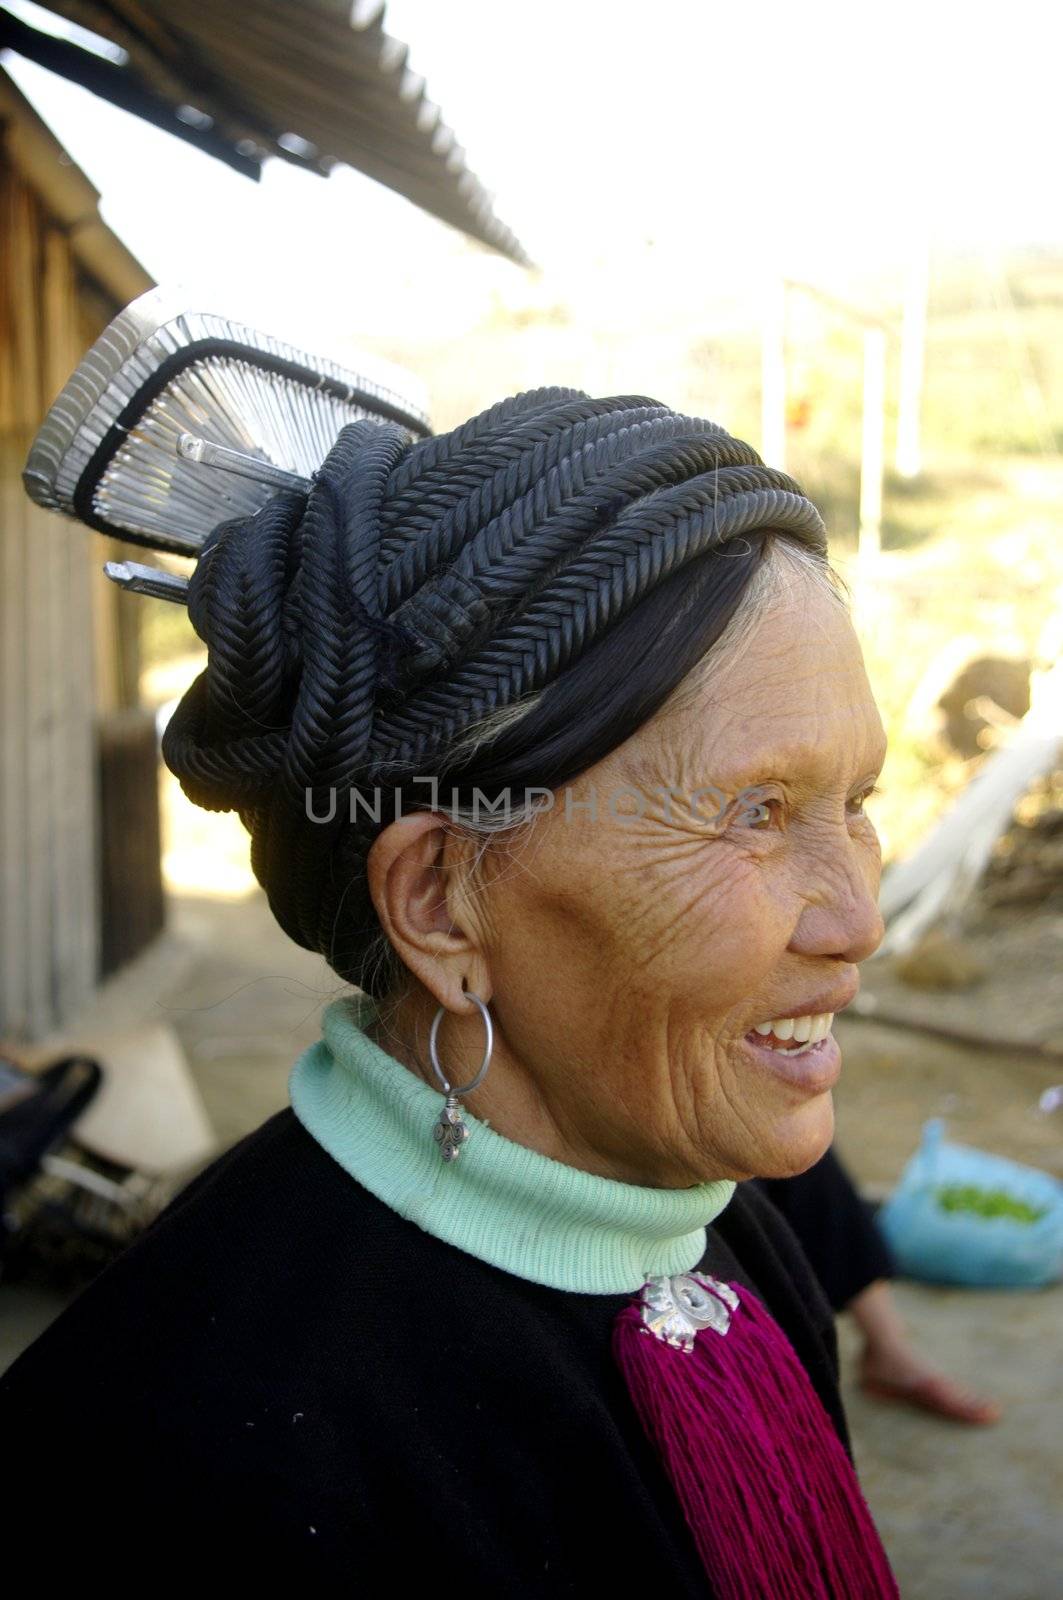 The black Dao ethnicity are widespread in northern Vietnam. But Dao Tien are unique because the women wear a shirt and black trousers, but above this cap so special. The cap is made of braided rope black head cap and It is surmounted by an inverted truncated pyramid hammered aluminum.